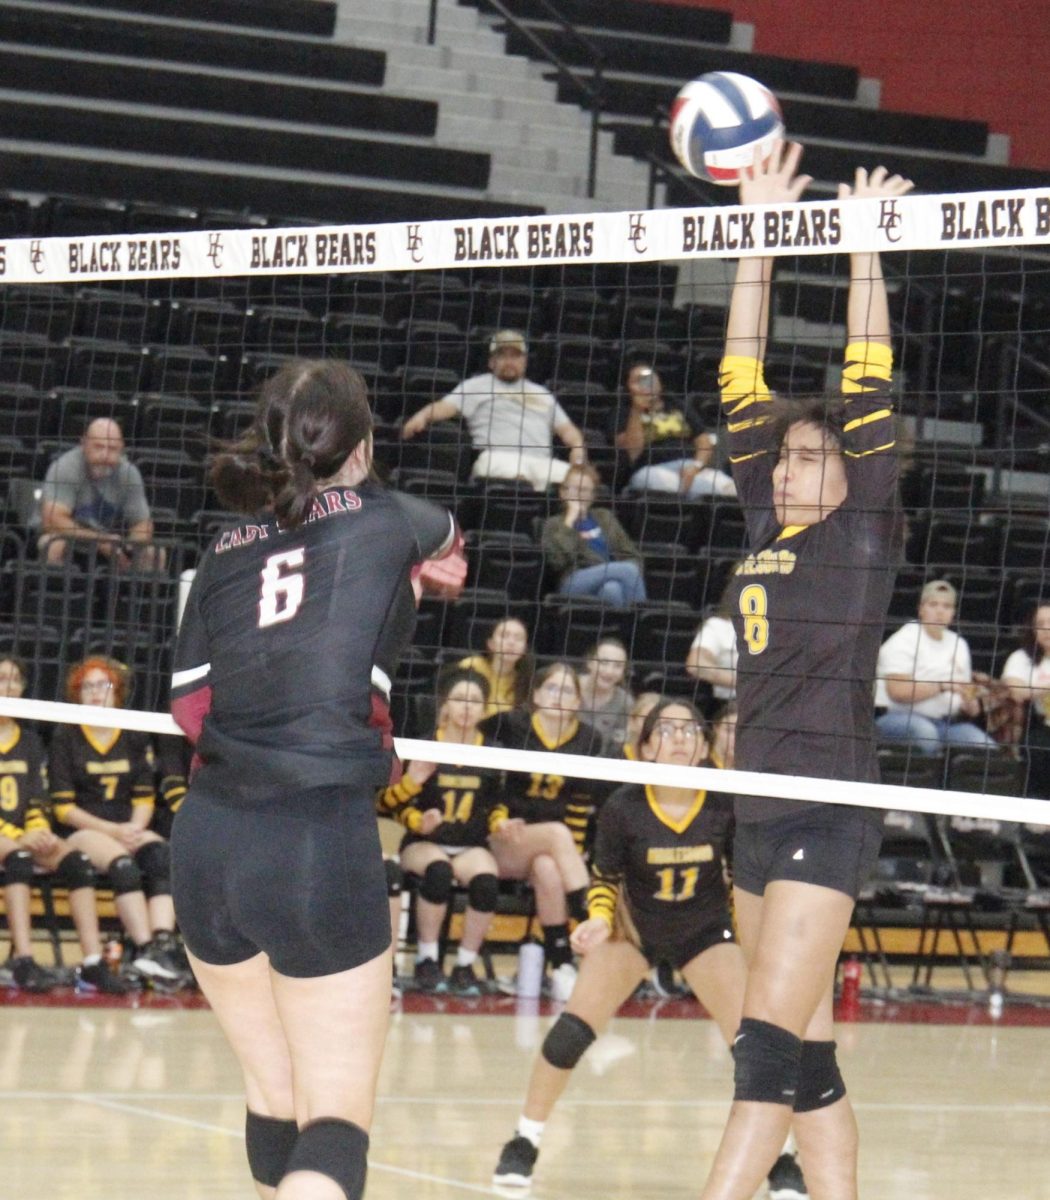 Harlan Countys Kalista Dunn pounded home a point over the hands of Middlesboros Leah Spencer on Thursday in the Lady Bears three-set victory.